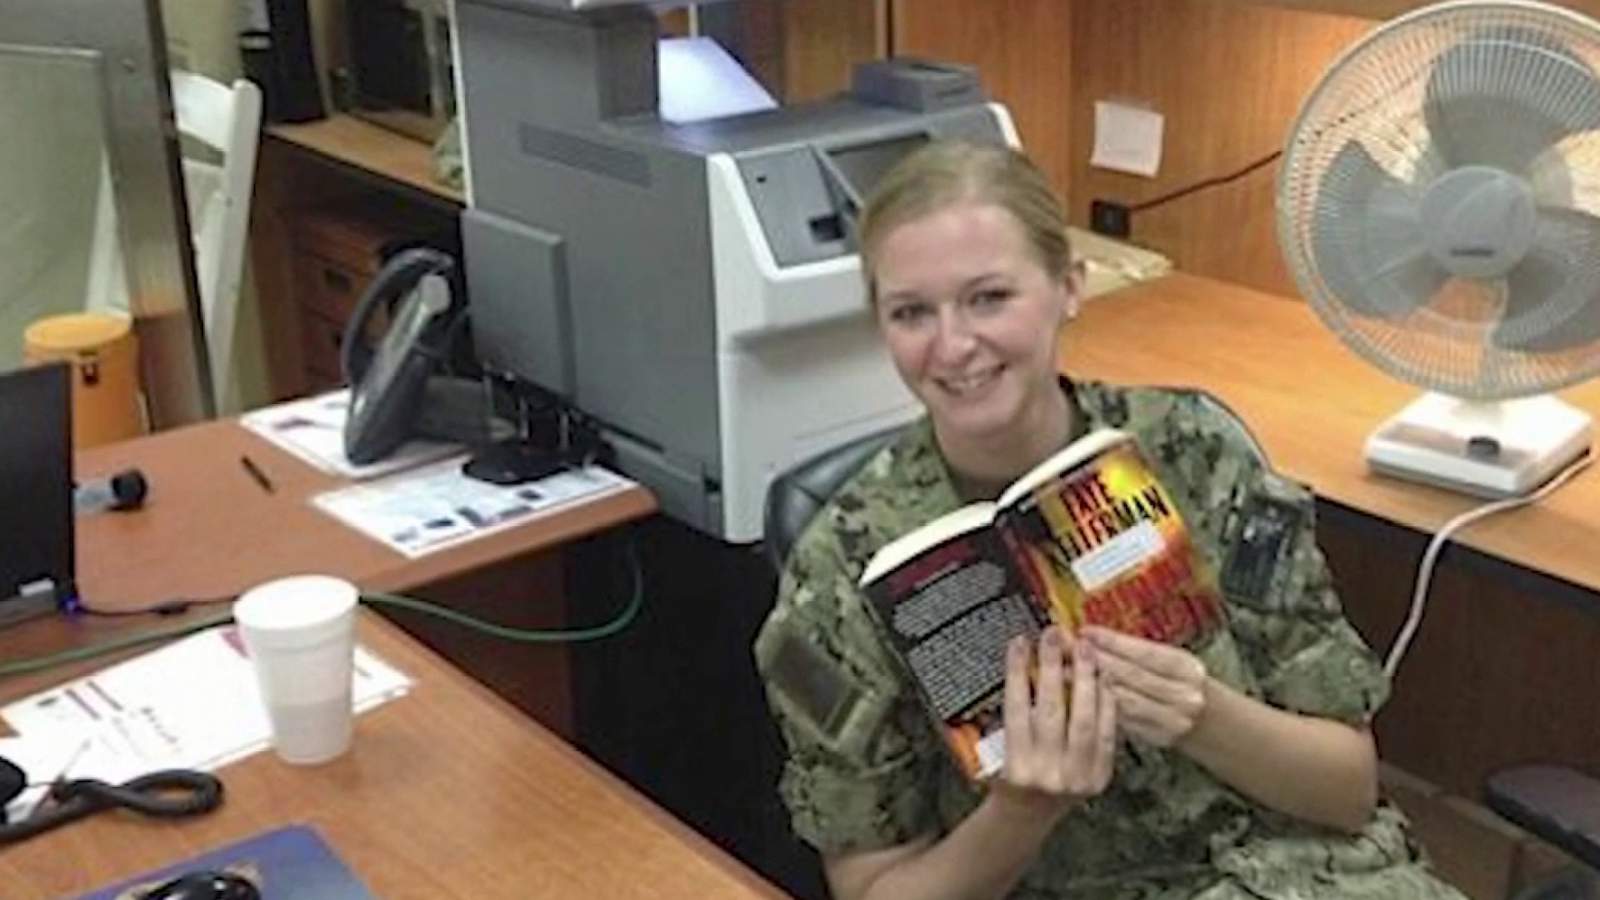 Operation Paperback book drive aims to support troops, veterans — and you can help